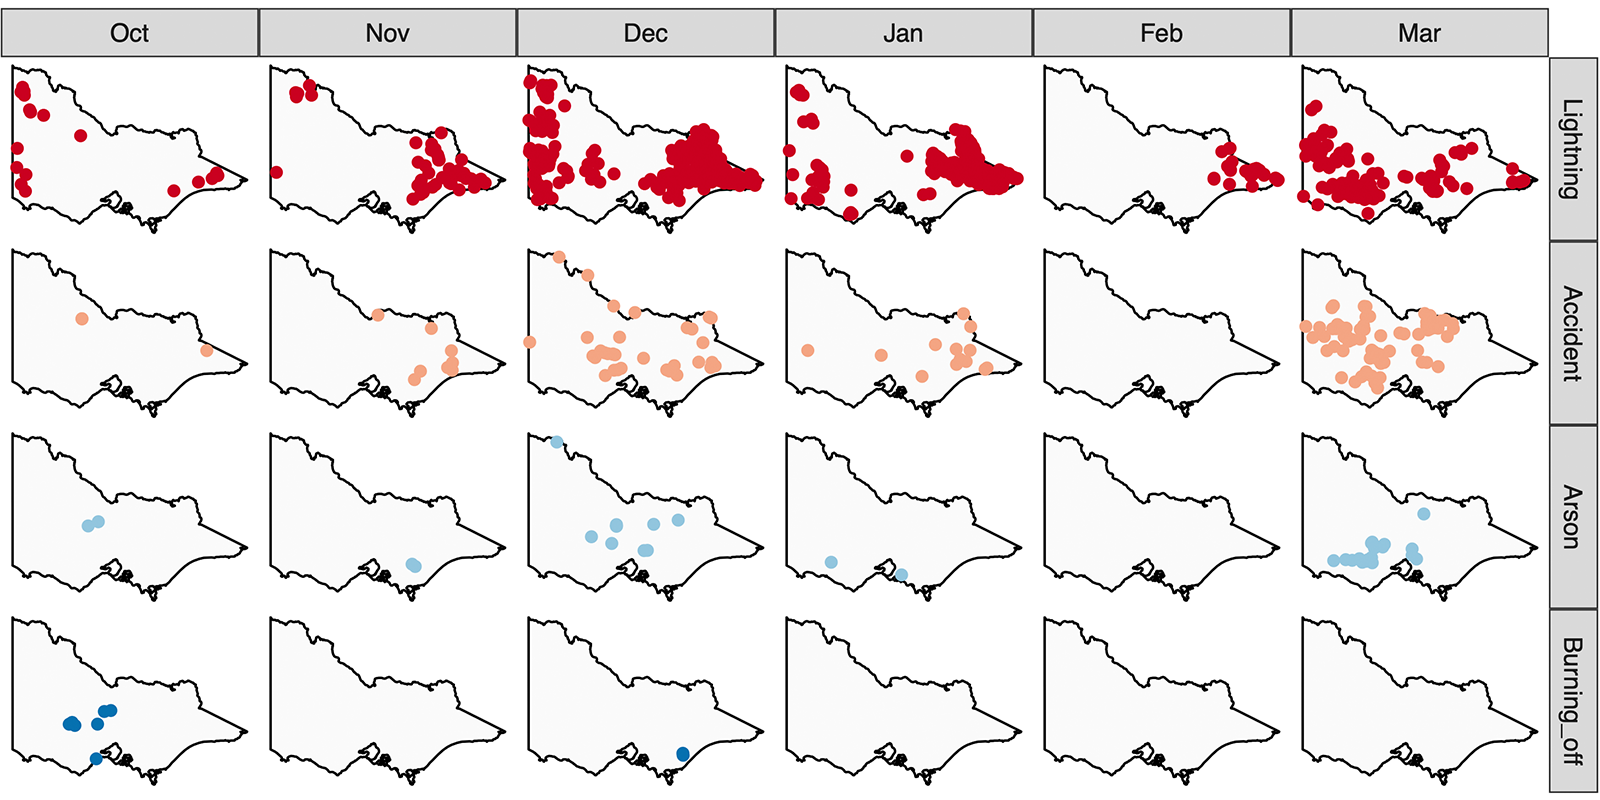 Spatio-temporal distribution of cause predictions for 2019-2020 season. Reassuringly, fires due to burning off primarily occurred in October, prior to fire restrictions. February fires were all predicted to be due to lightning.